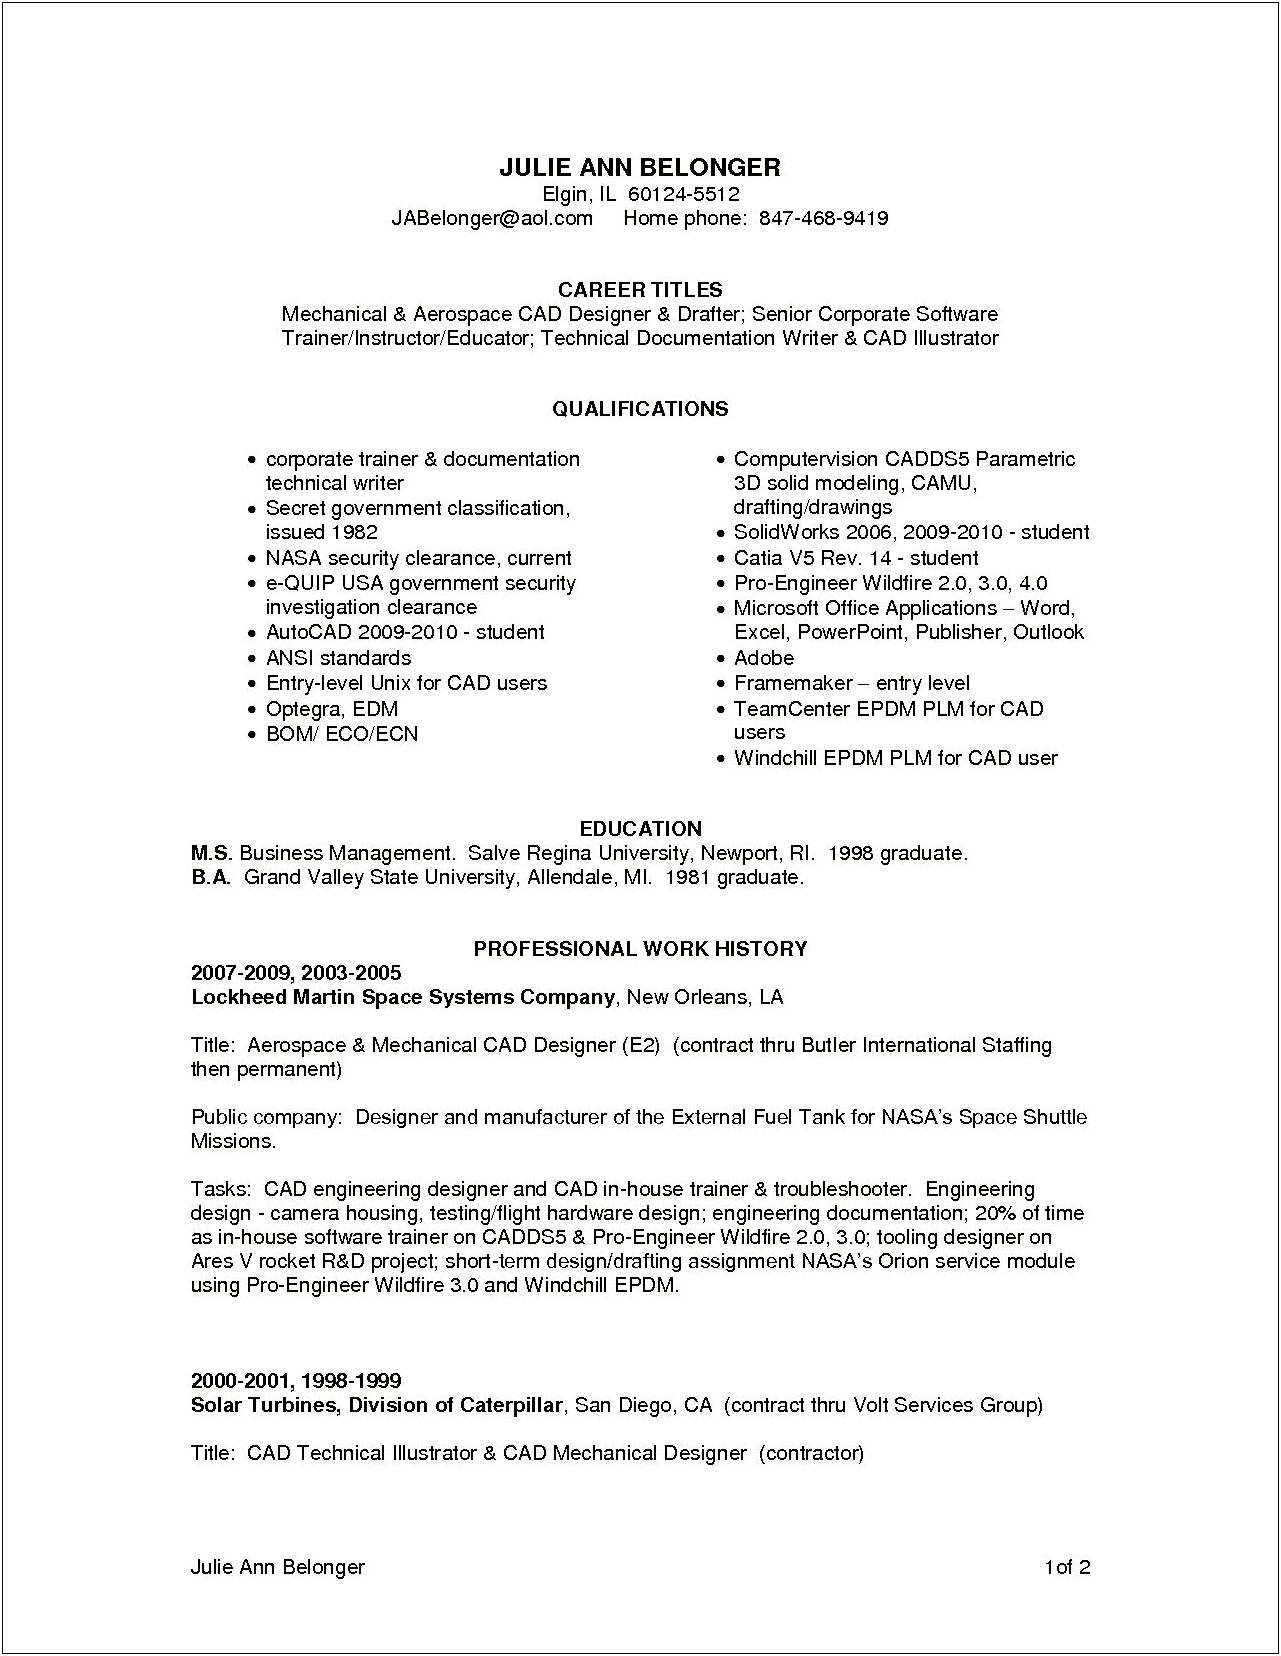 Resume Qualification Examples For Drafters